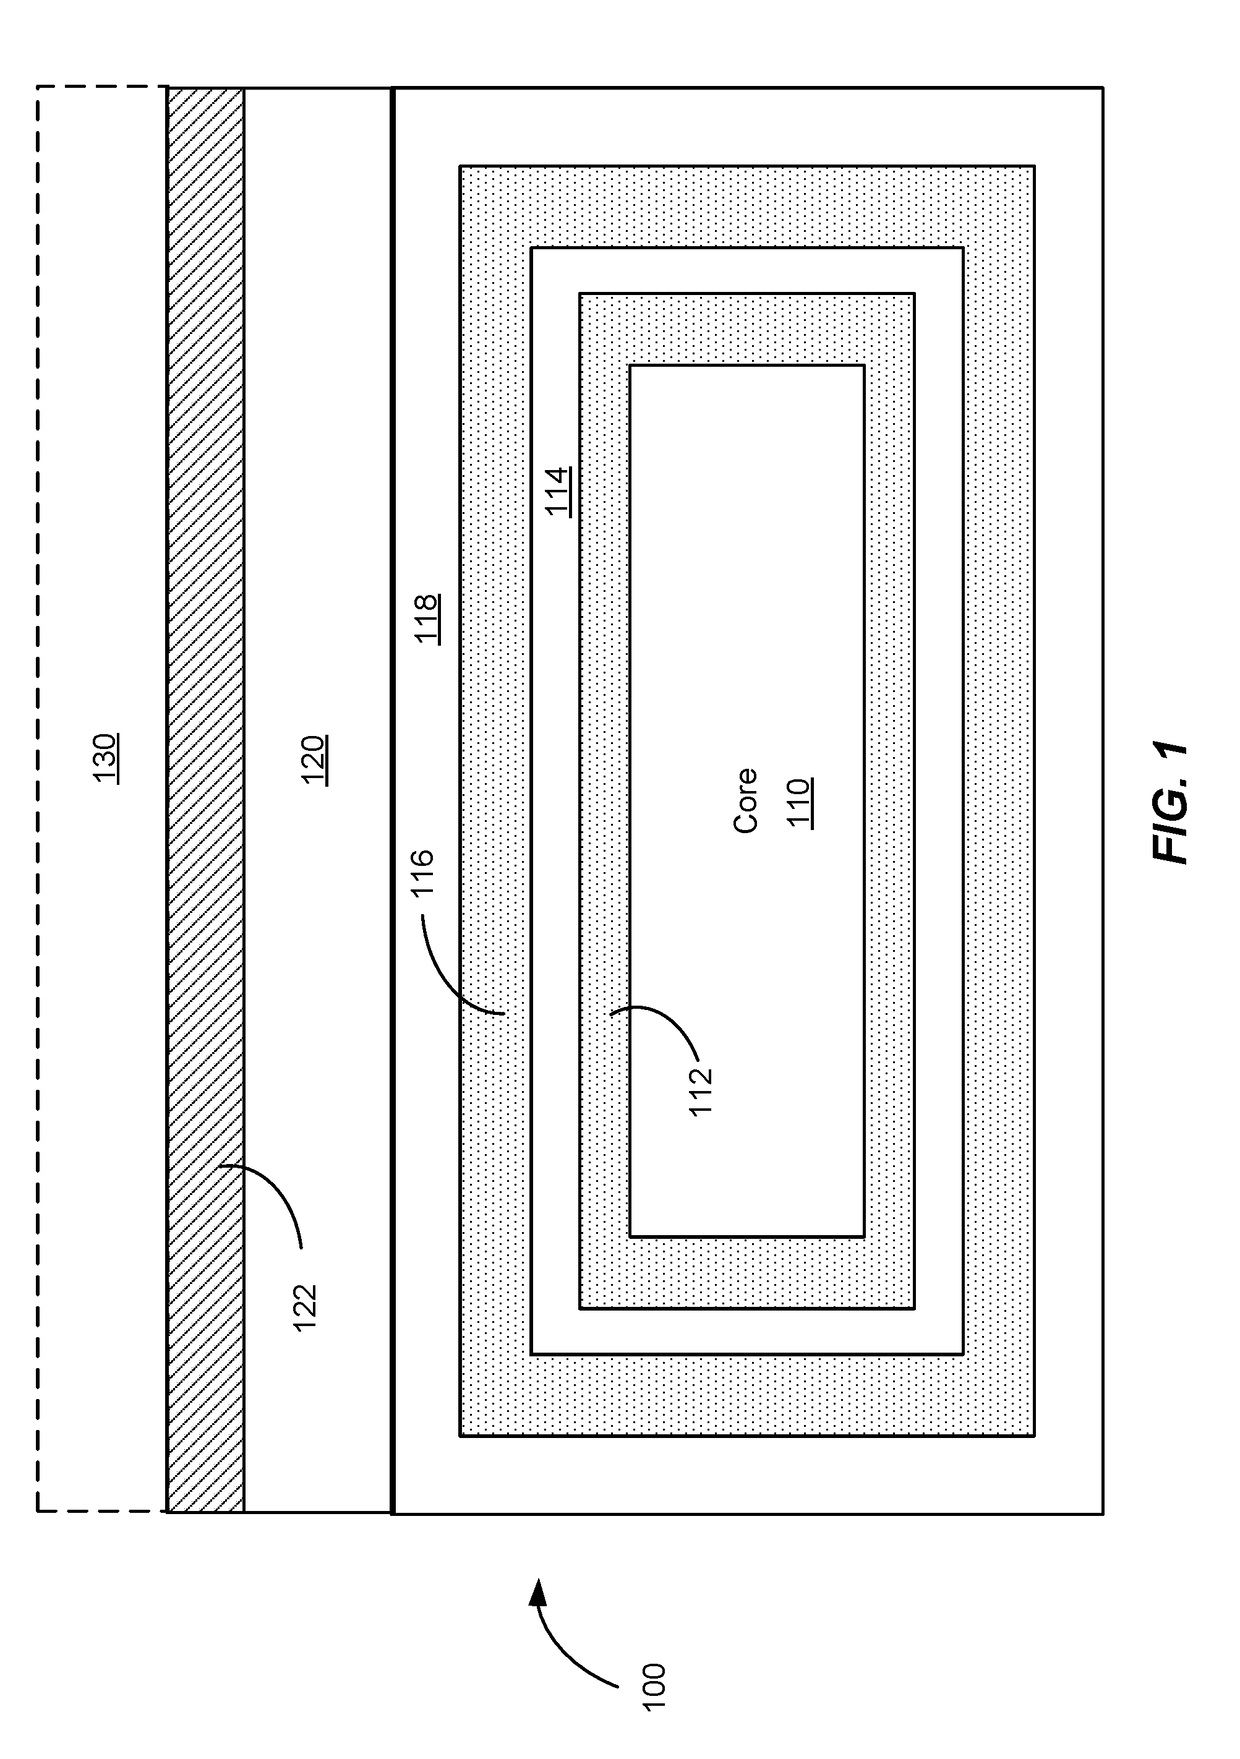 Vertical semiconductor diode manufactured with an engineered substrate